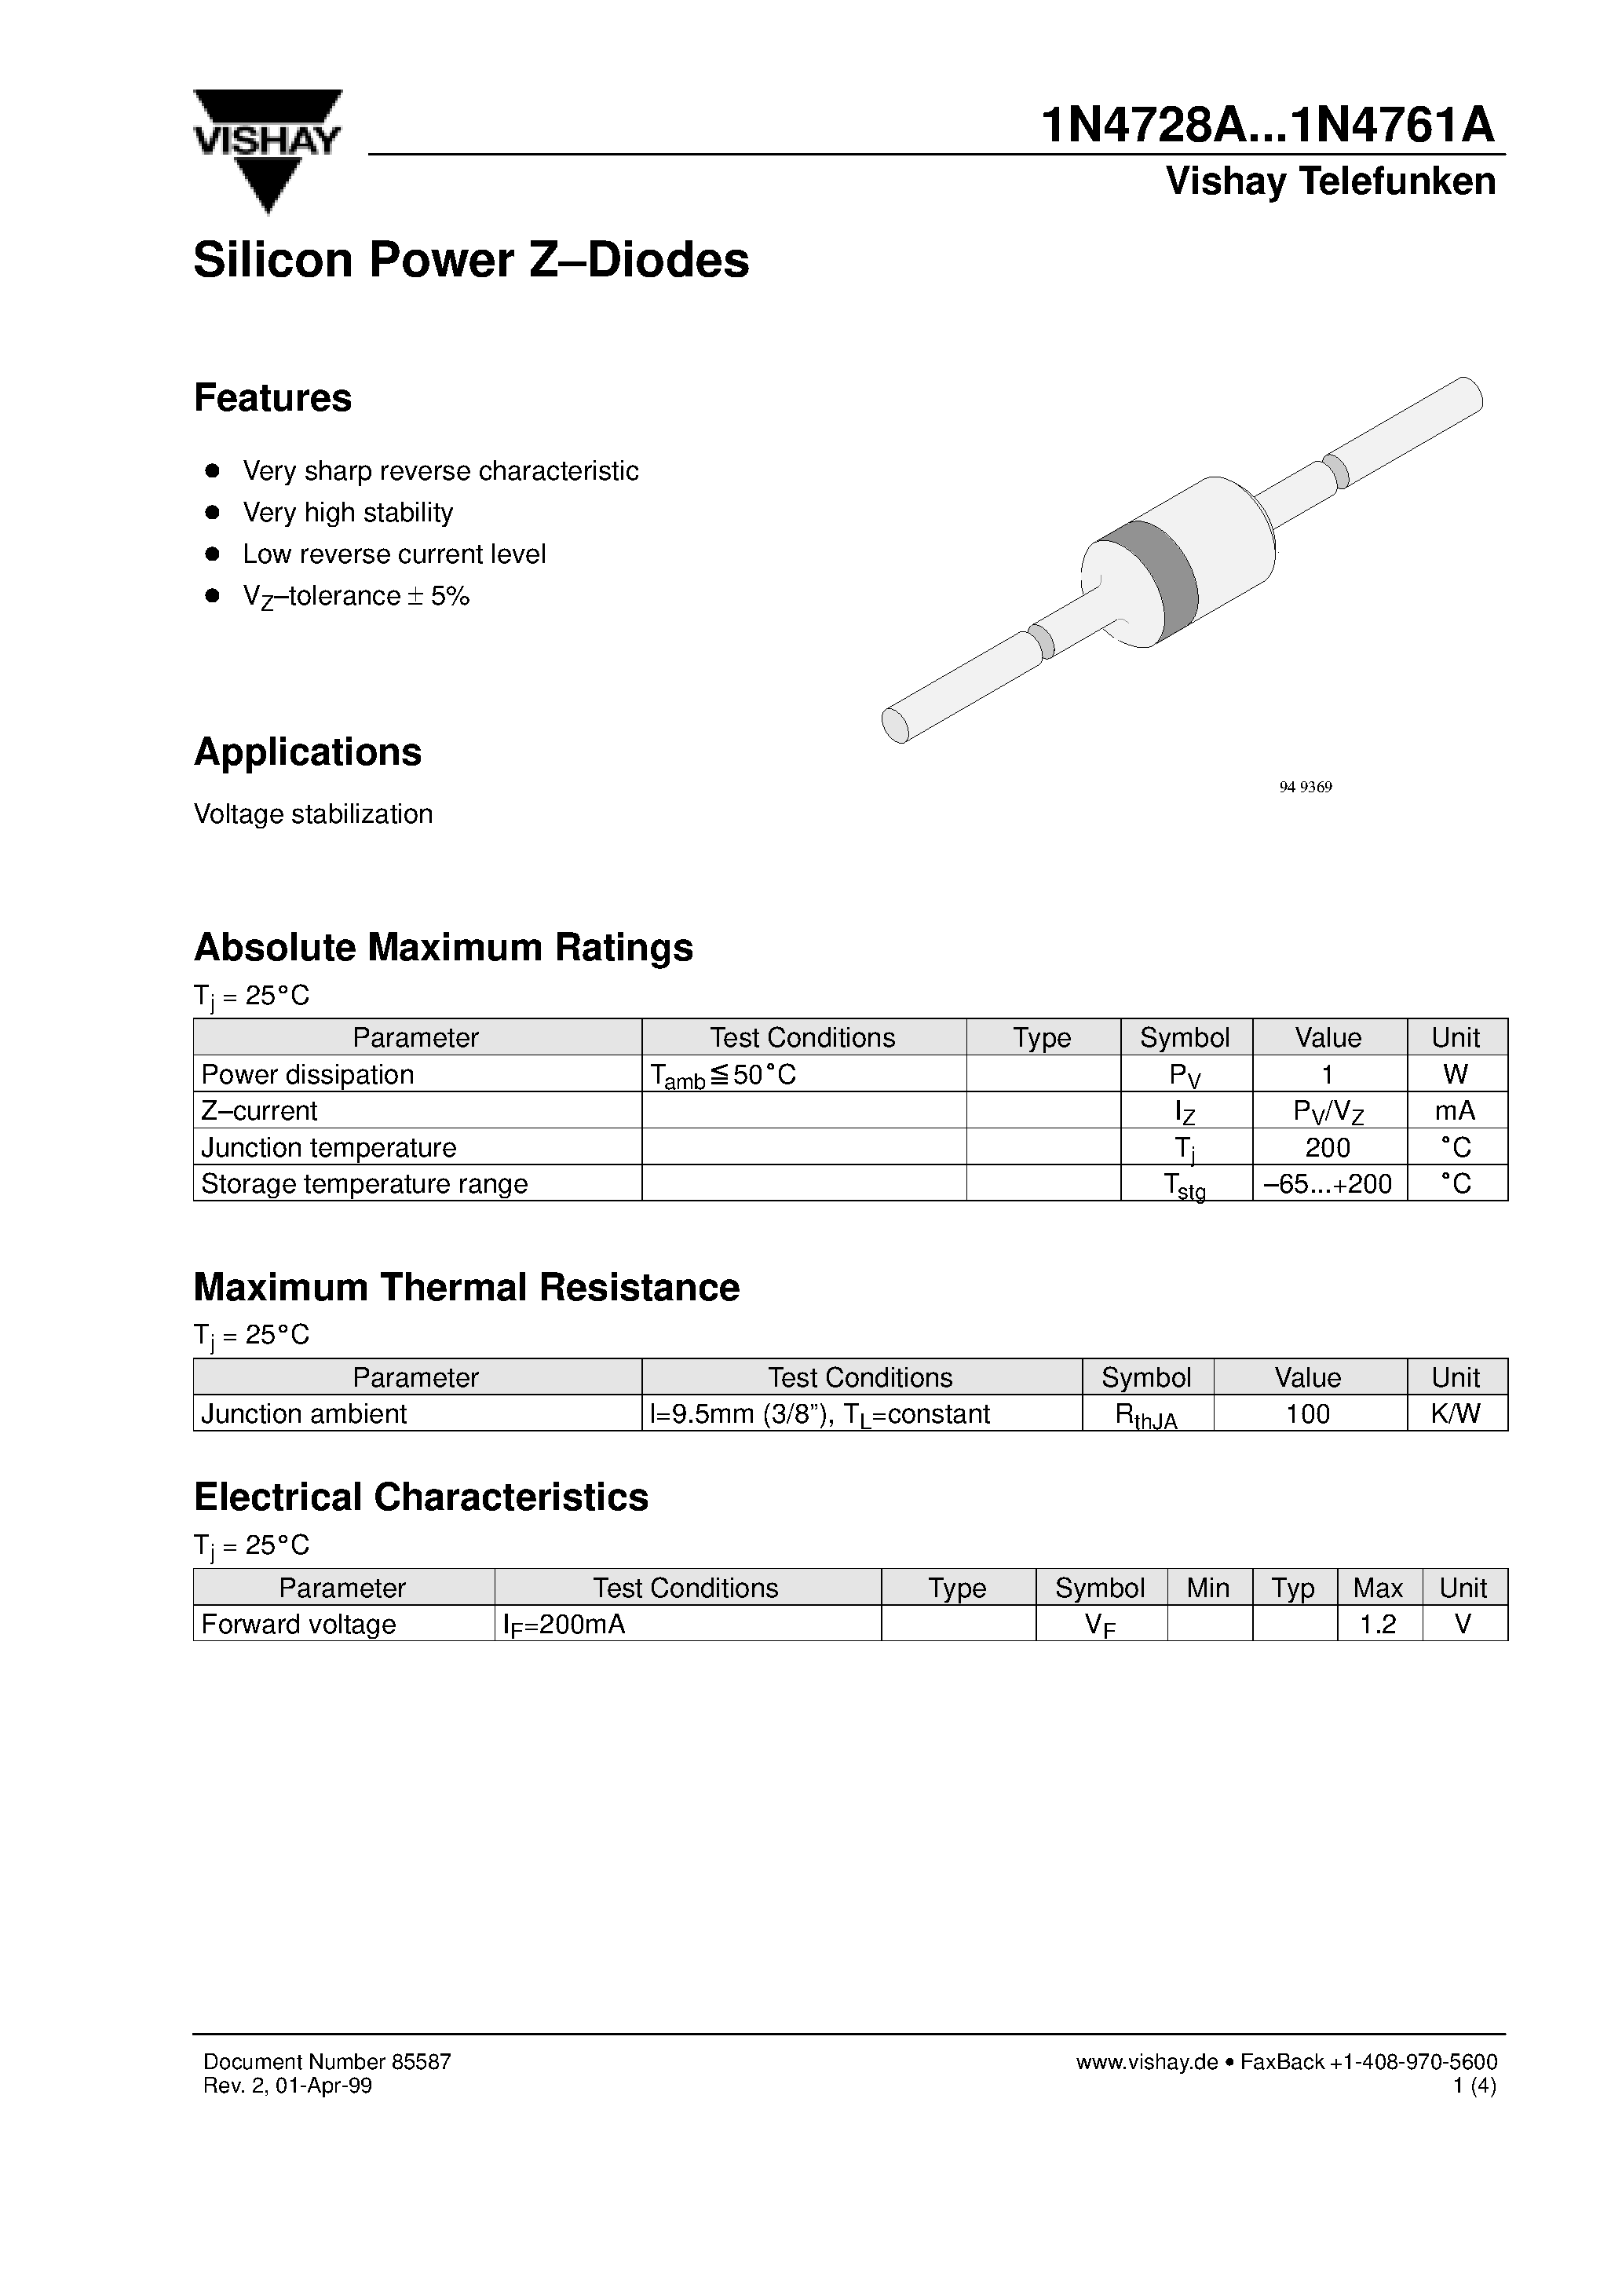 Даташит 1N4730A - Silicon Power Z-Diodes страница 1